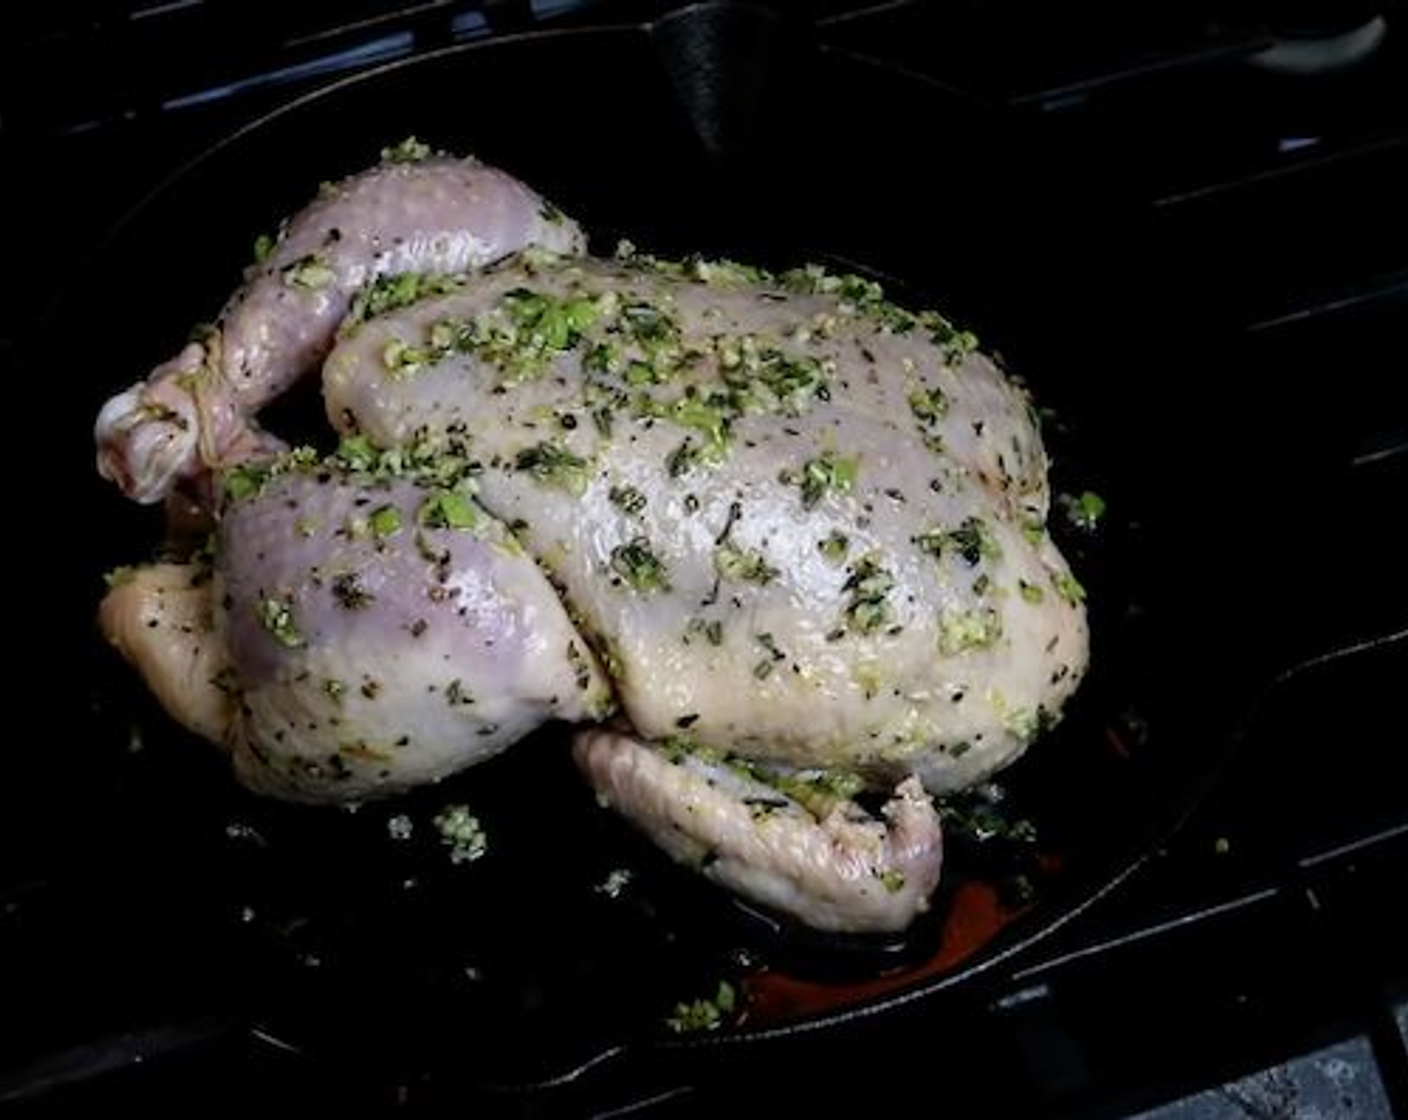 step 4 Using some kitchen string tie the chicken legs together, then place the chicken in the center of the preheated oven.